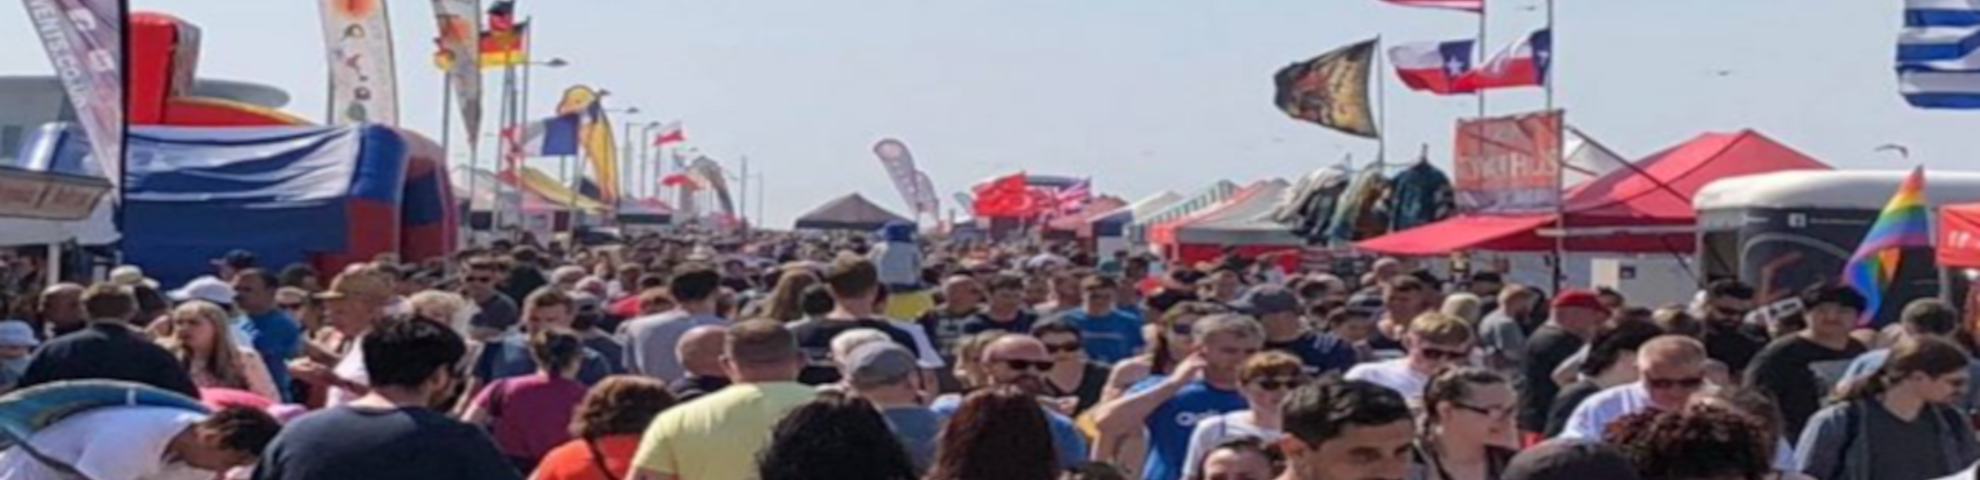 A large crowd looking at the many stalls at New Brighton on a summer day